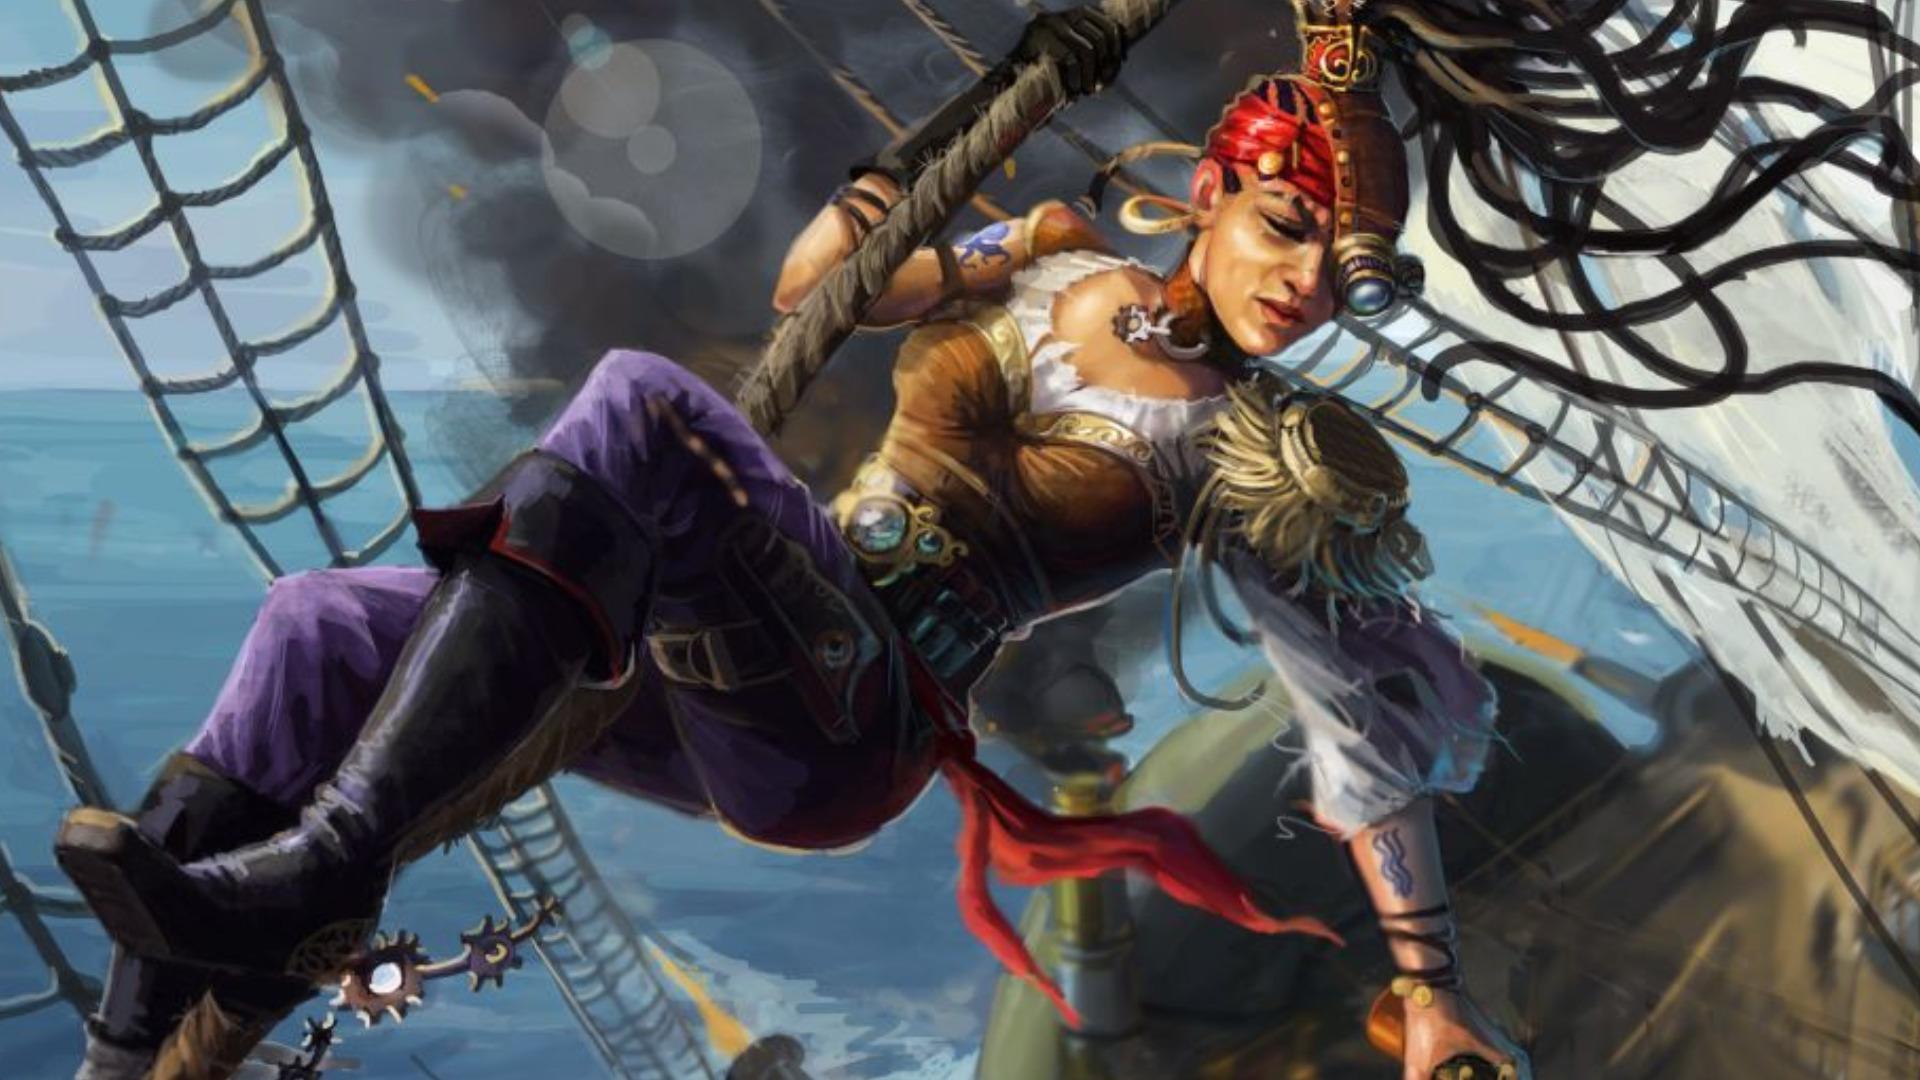 Pirate Wench Wallpaper. Pirate Wench